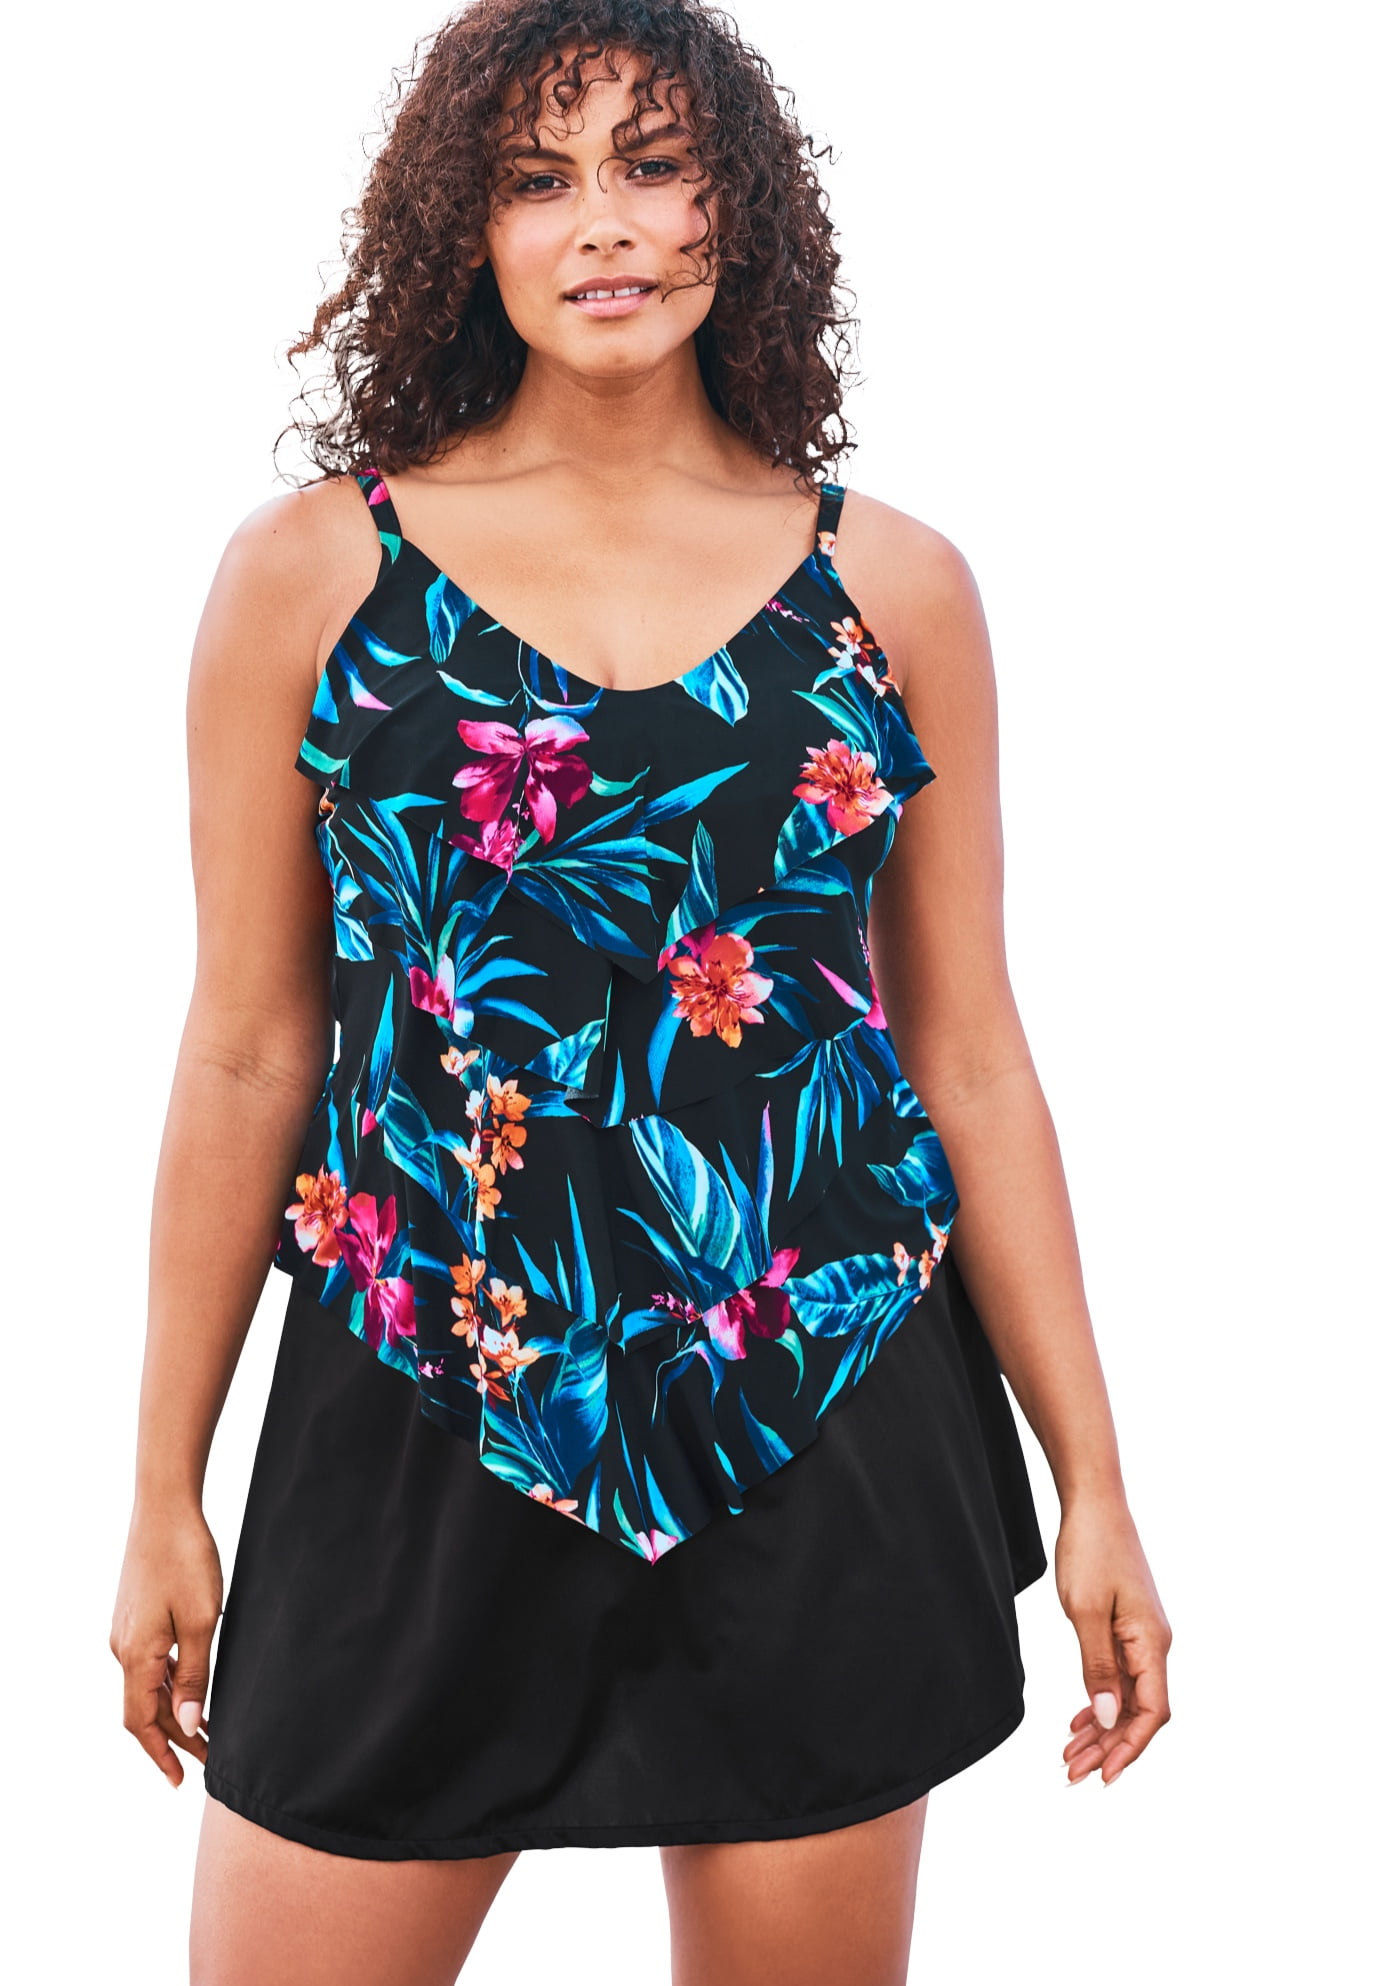 Trimshaper - Swimsuits For All Women's Plus Size V-Neck Tiered Tankini ...